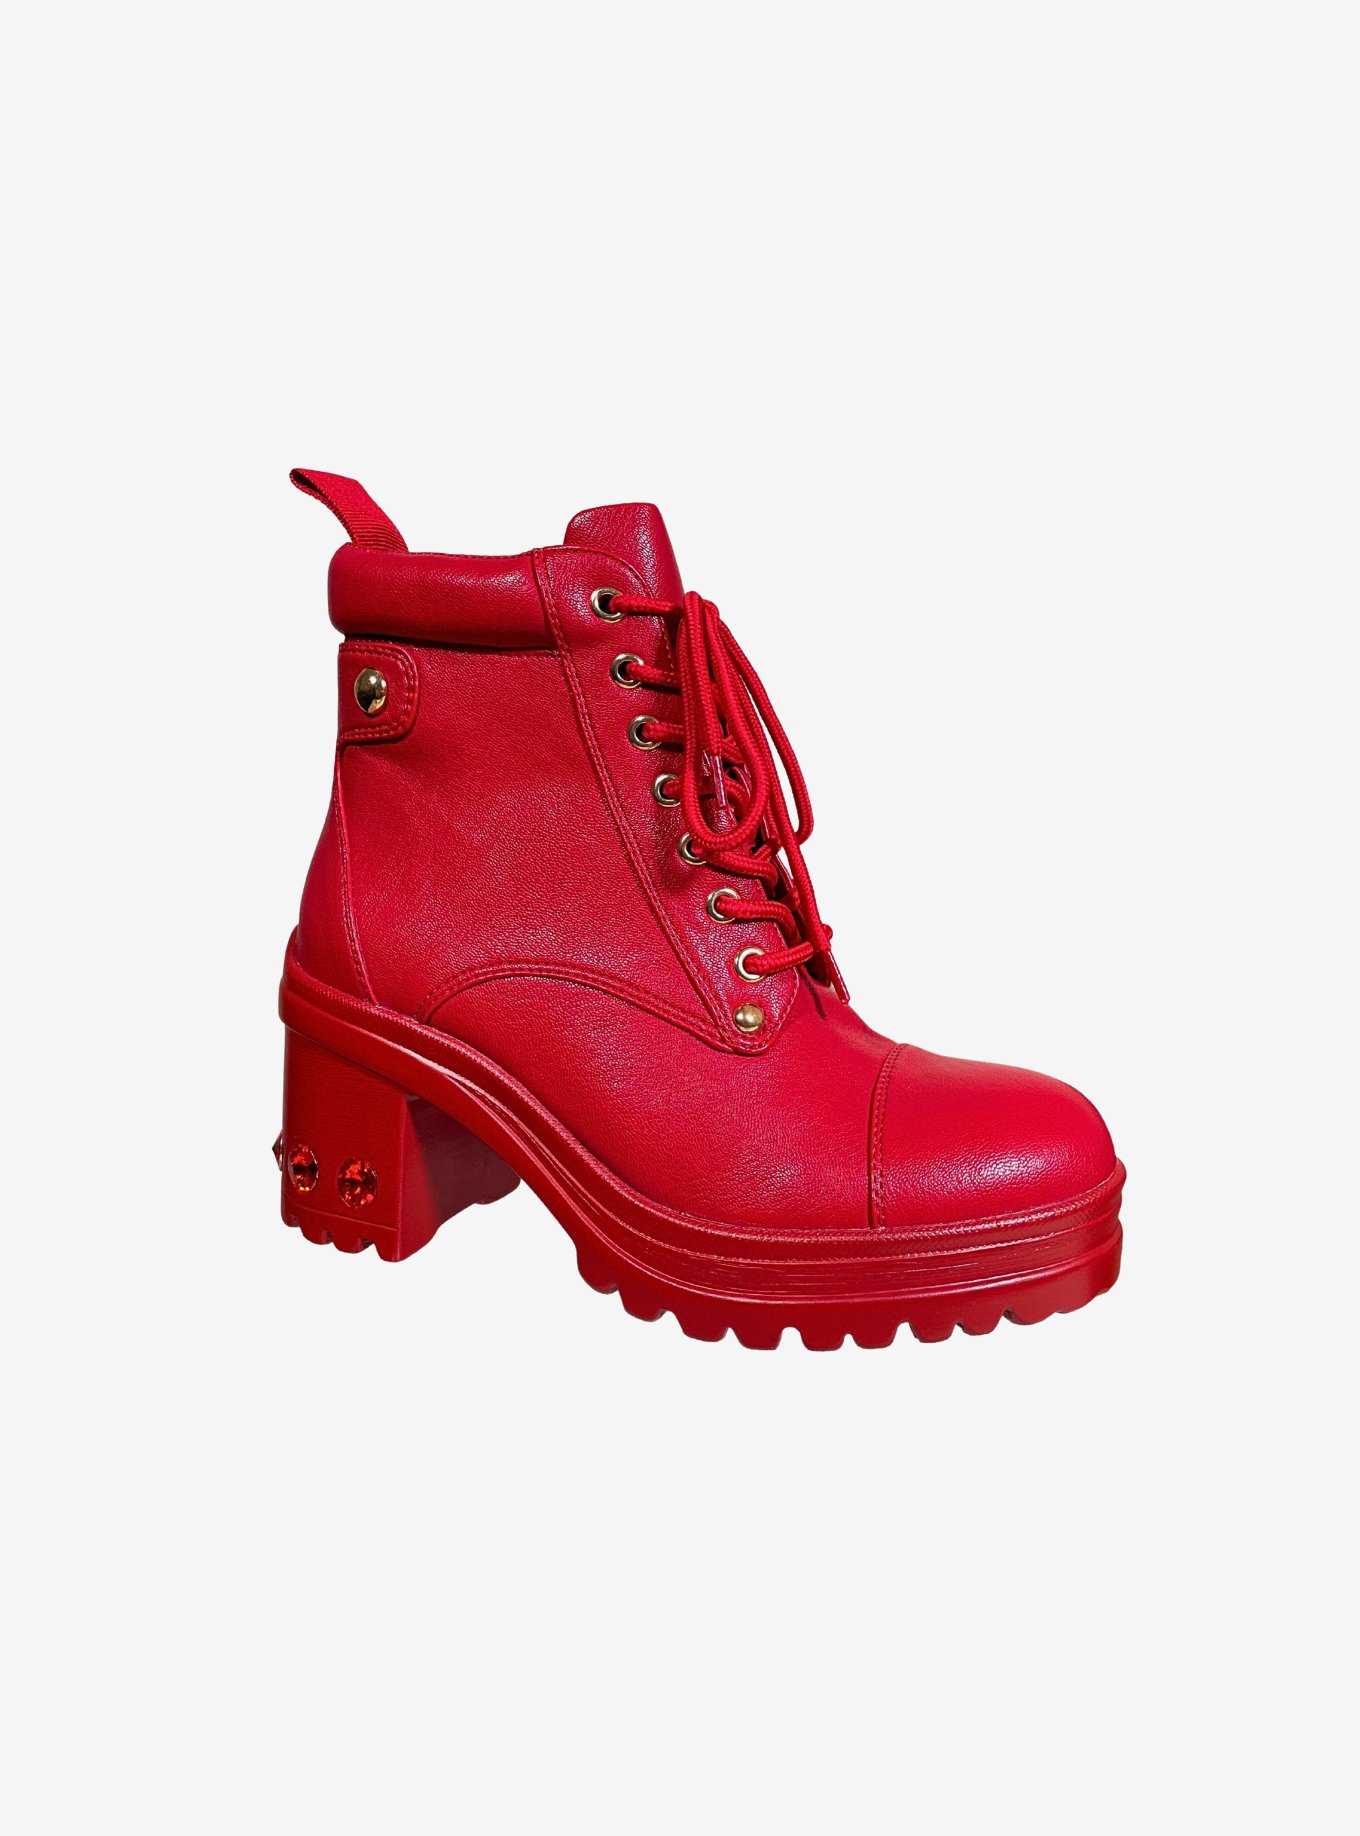 Thunder Bootie Red, , hi-res